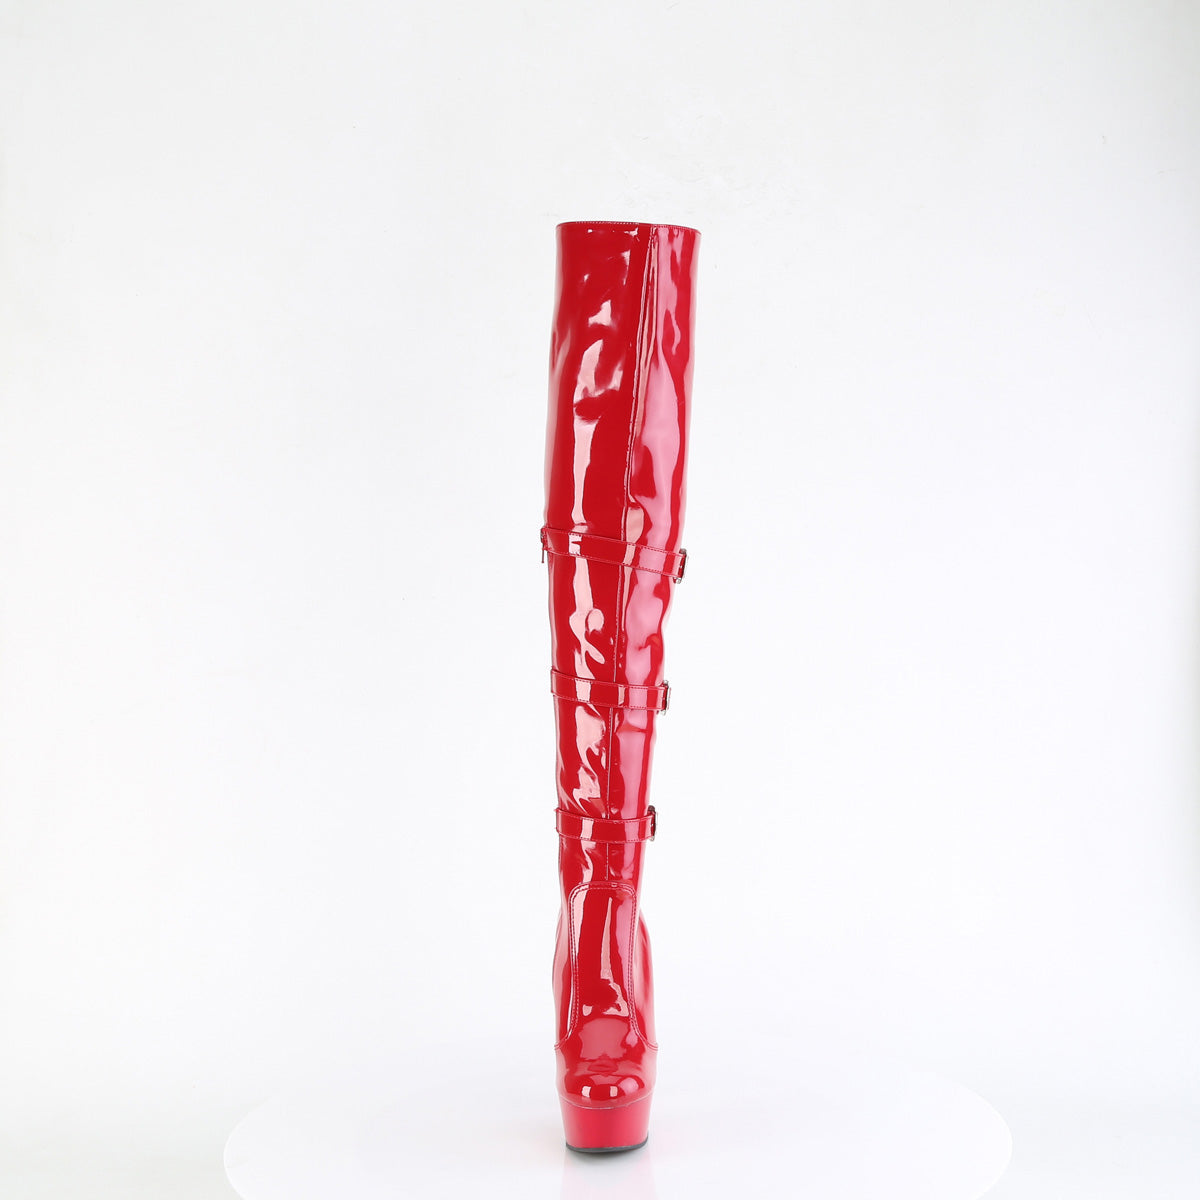 DELIGHT-3018 Pleaser Red Stretch Patent/Red Platform Shoes [Thigh High Boots]